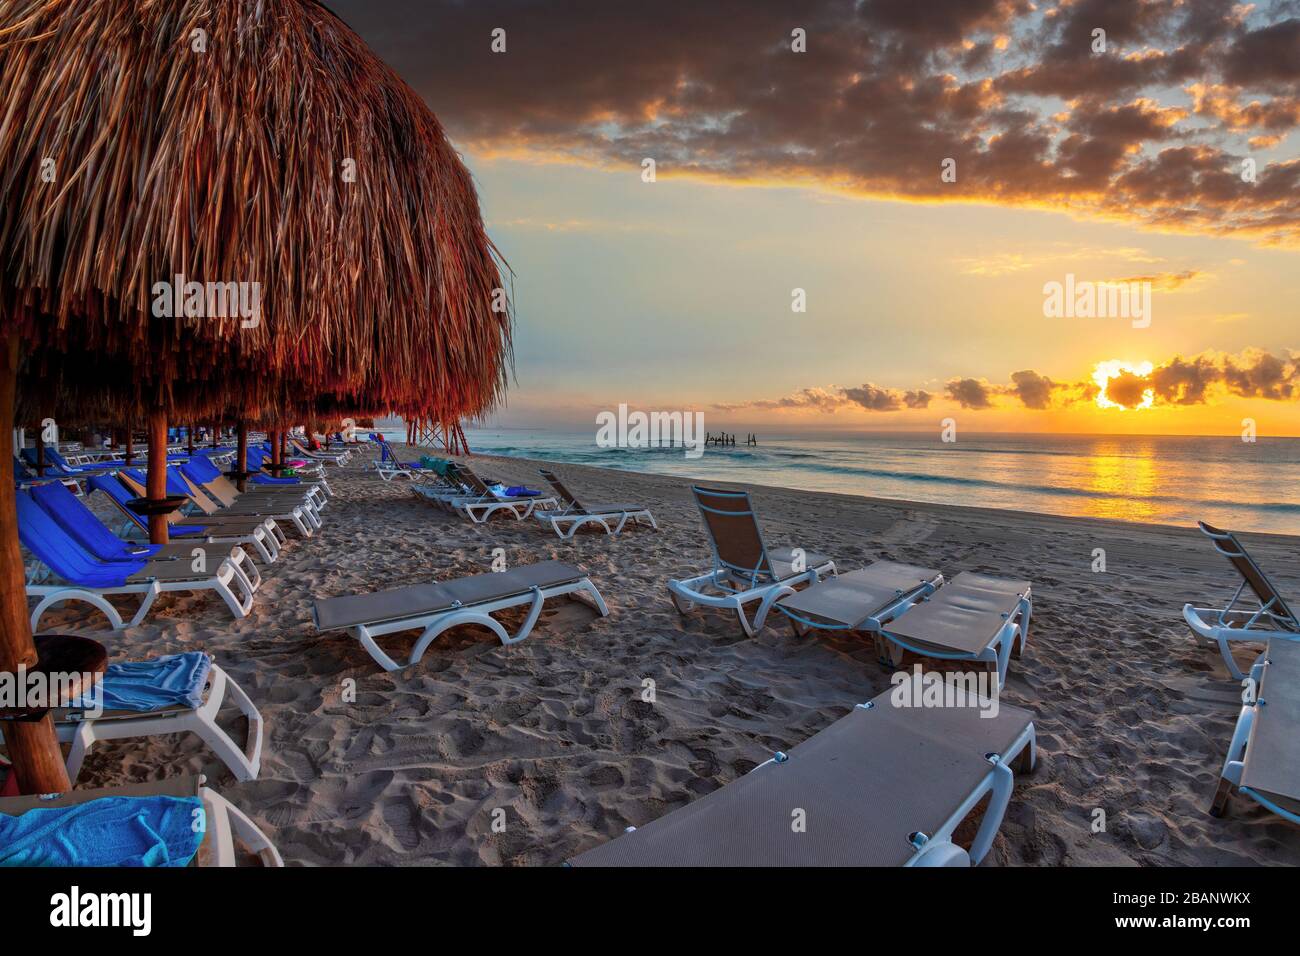 Golden sunrise over rows of lounge chairs and palm tree parasols on a sandy Caribbean beach vacation at Riviera Maya in Cancun, Mexico. Stock Photo